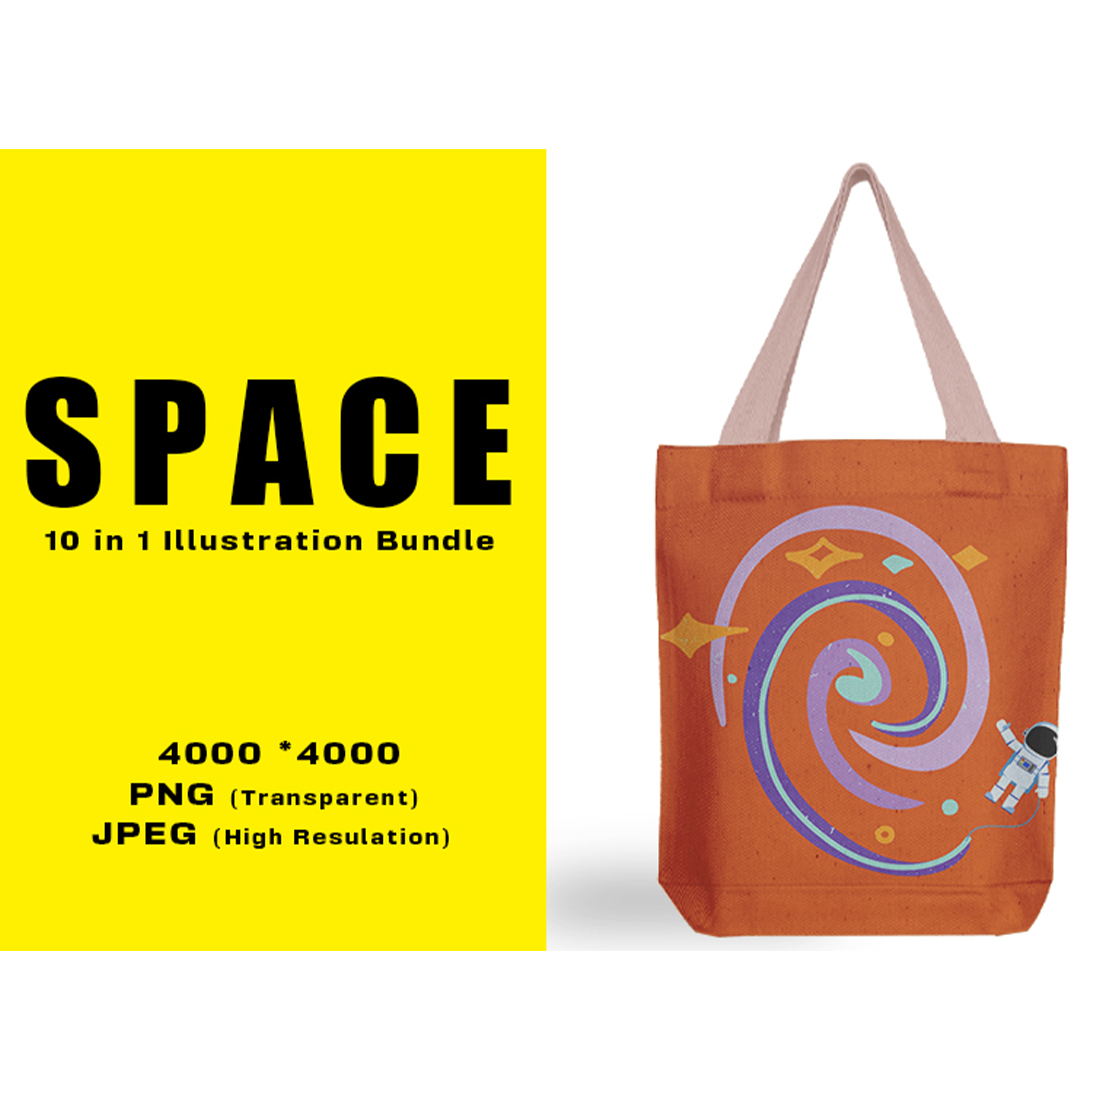 Image of a bag with an irresistible space-themed print